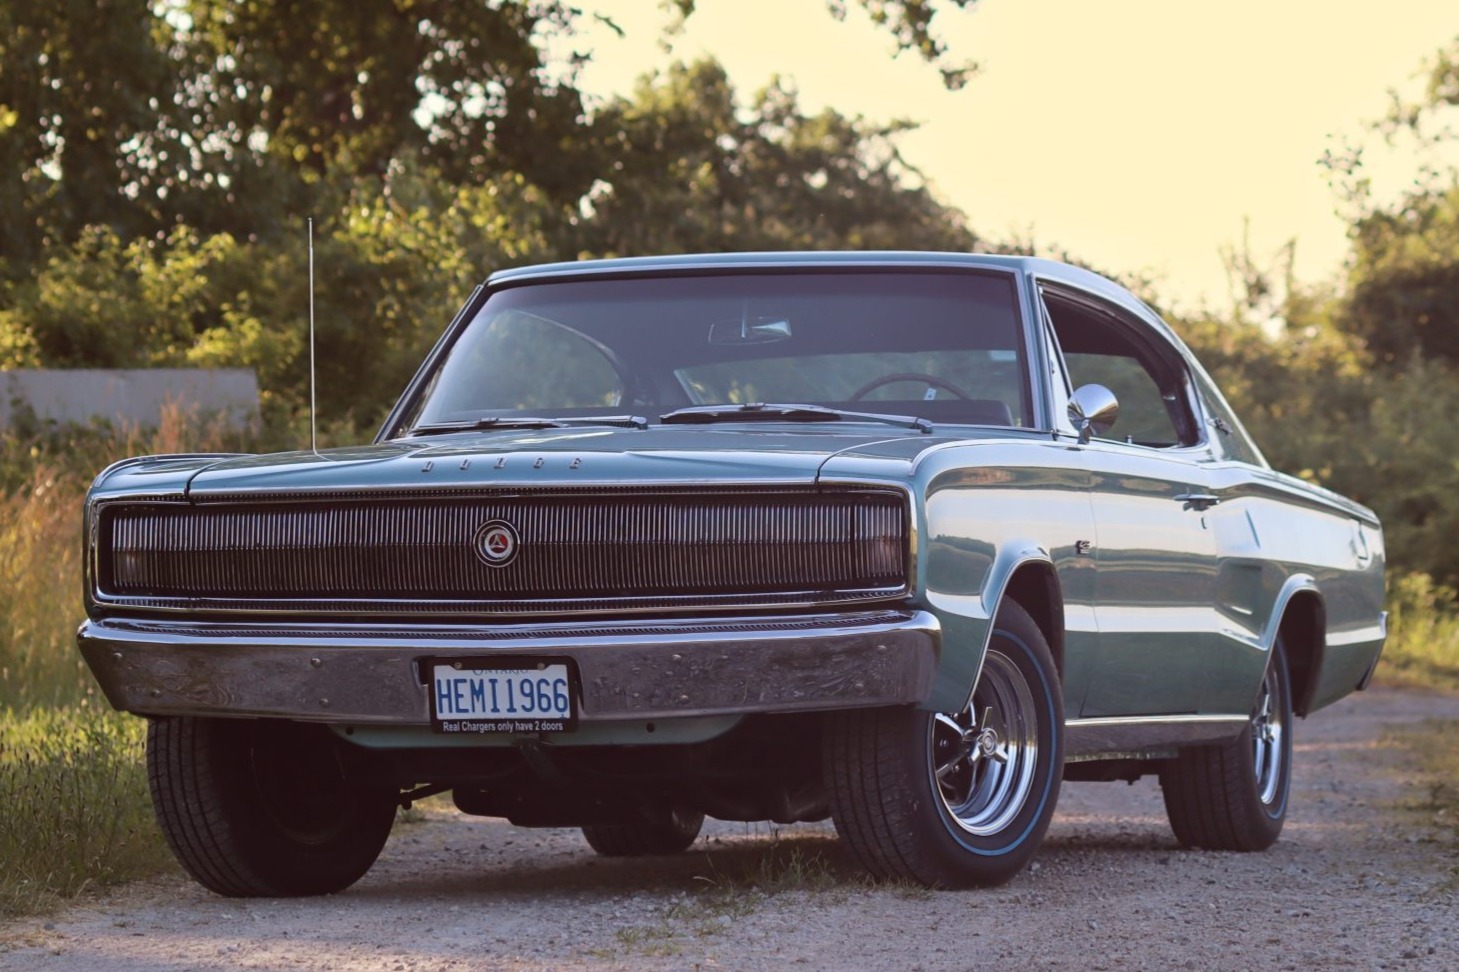 Used 1966 Dodge Charger 426 Hemi Review